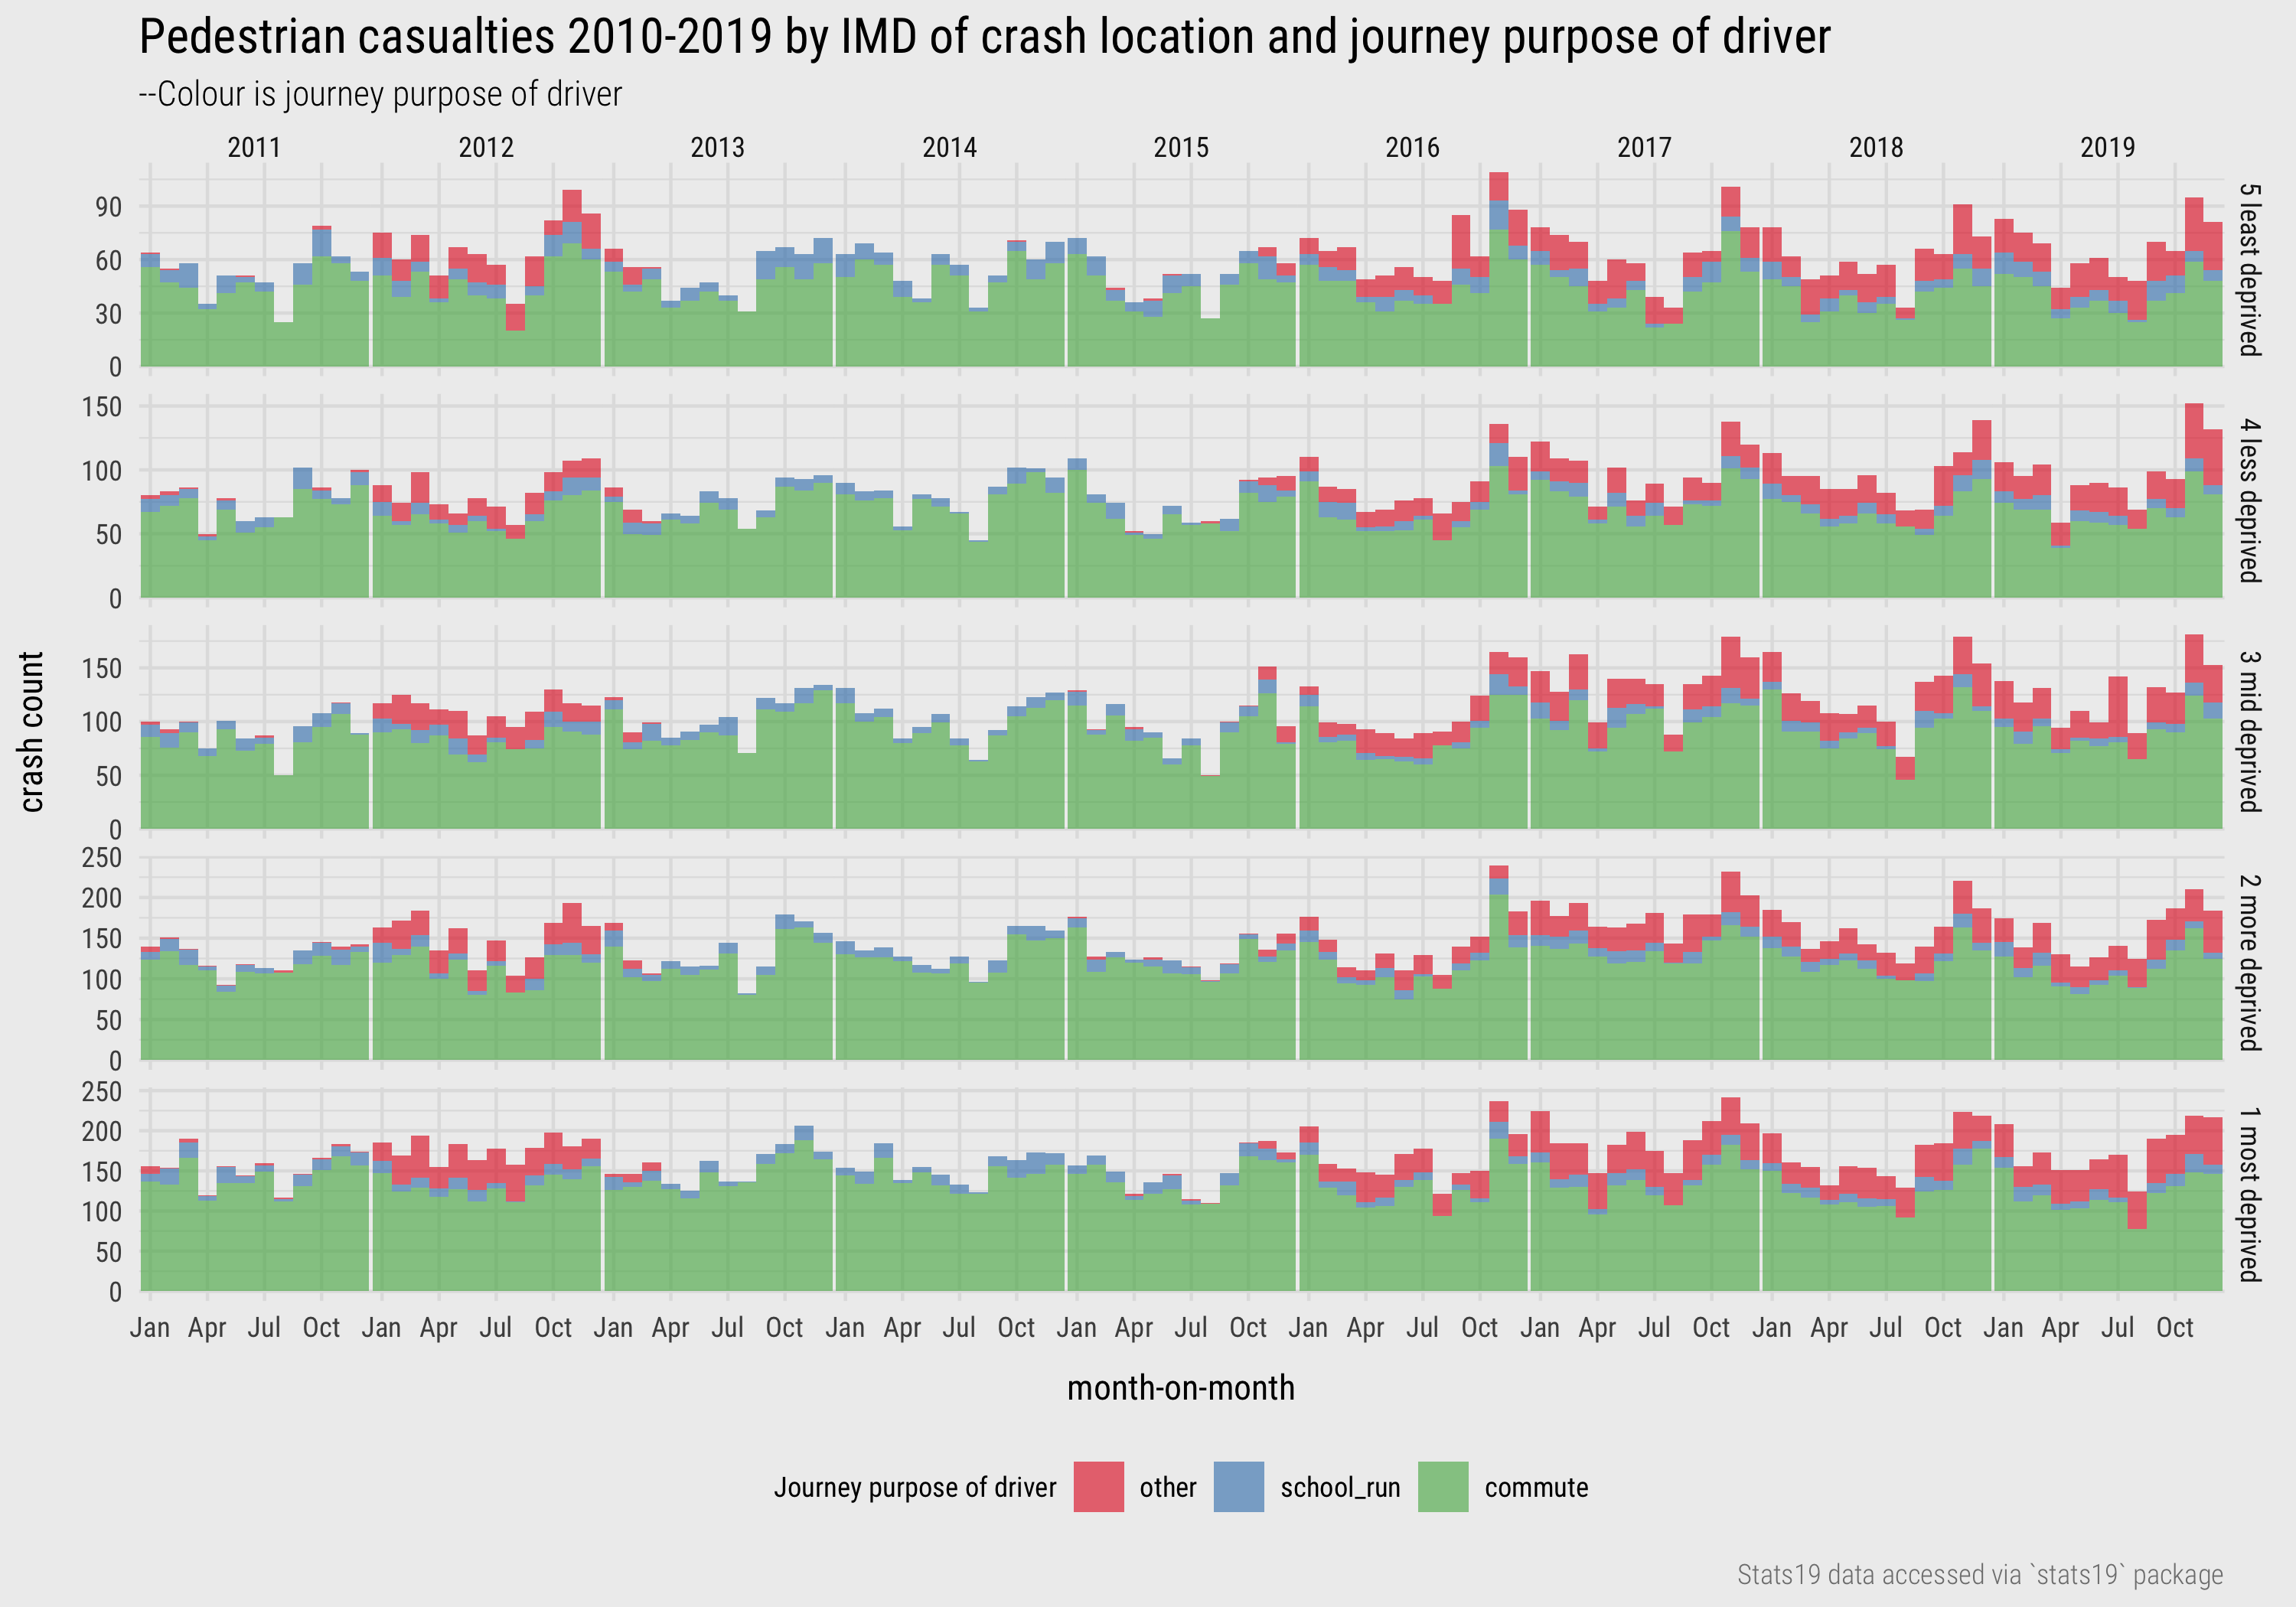 Pedestrian casualties by year, IMD and driver purpose.